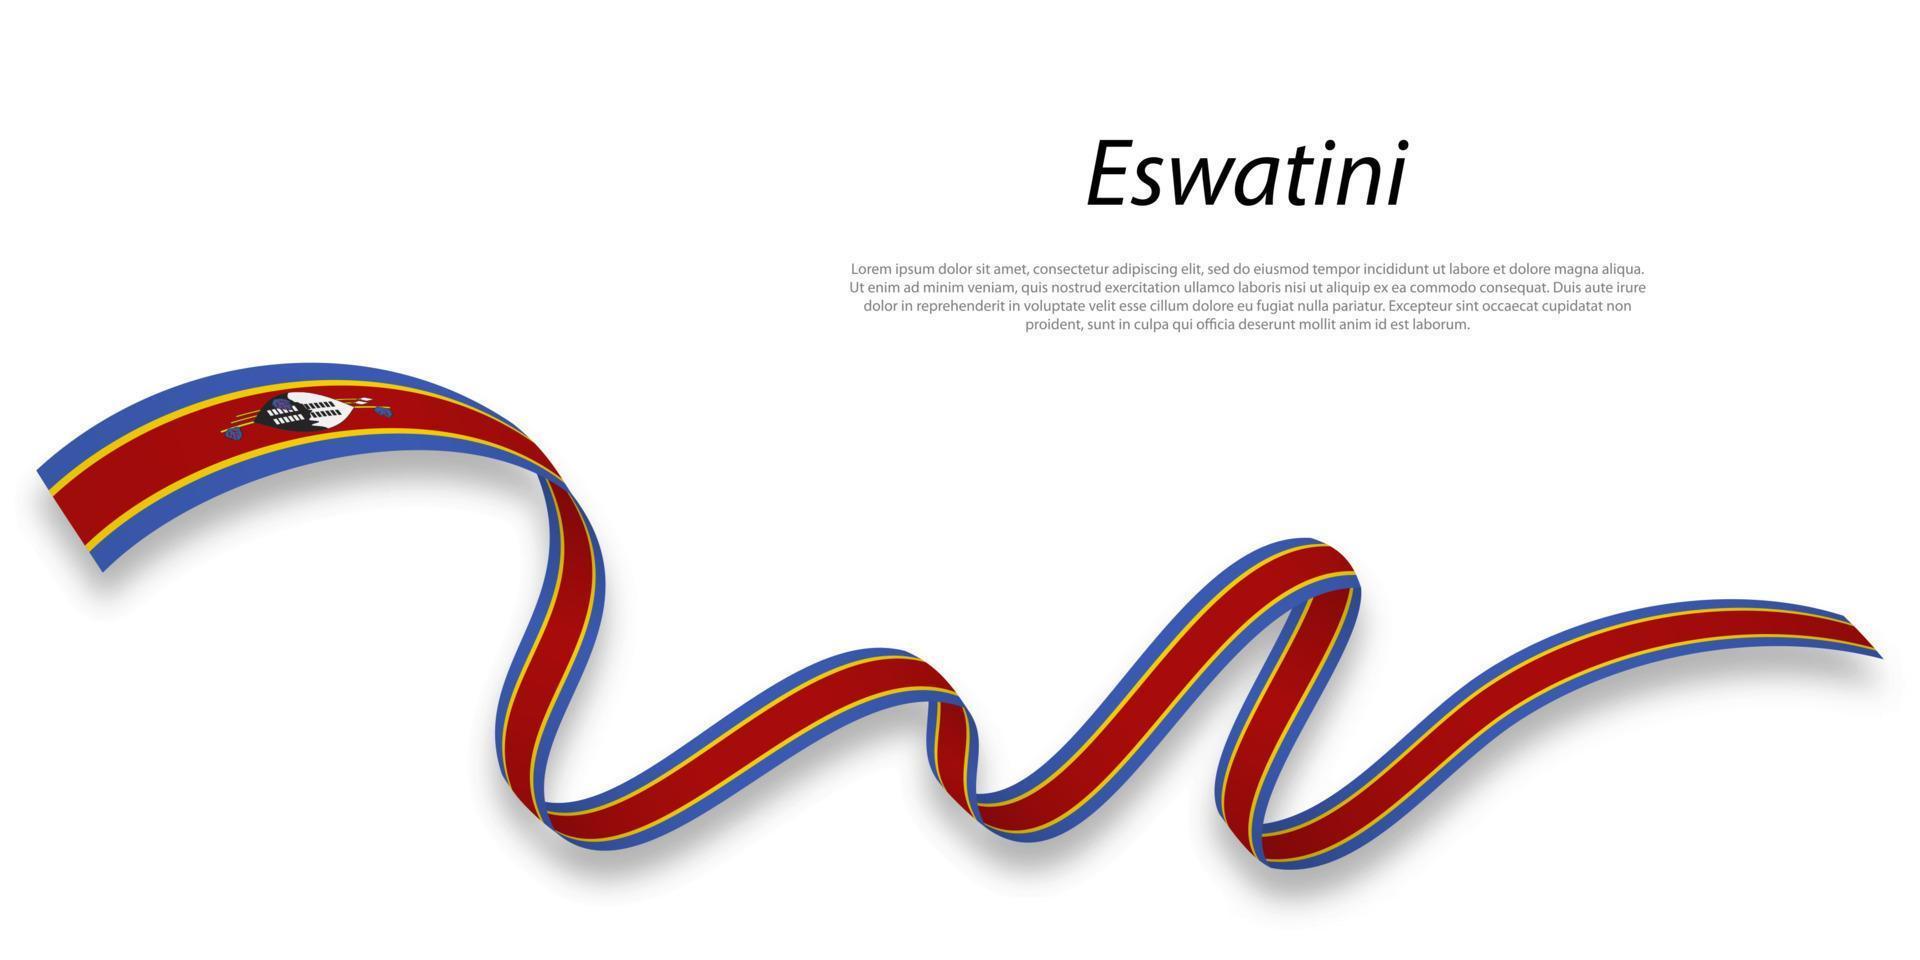 Waving ribbon or banner with flag of Eswatini. vector